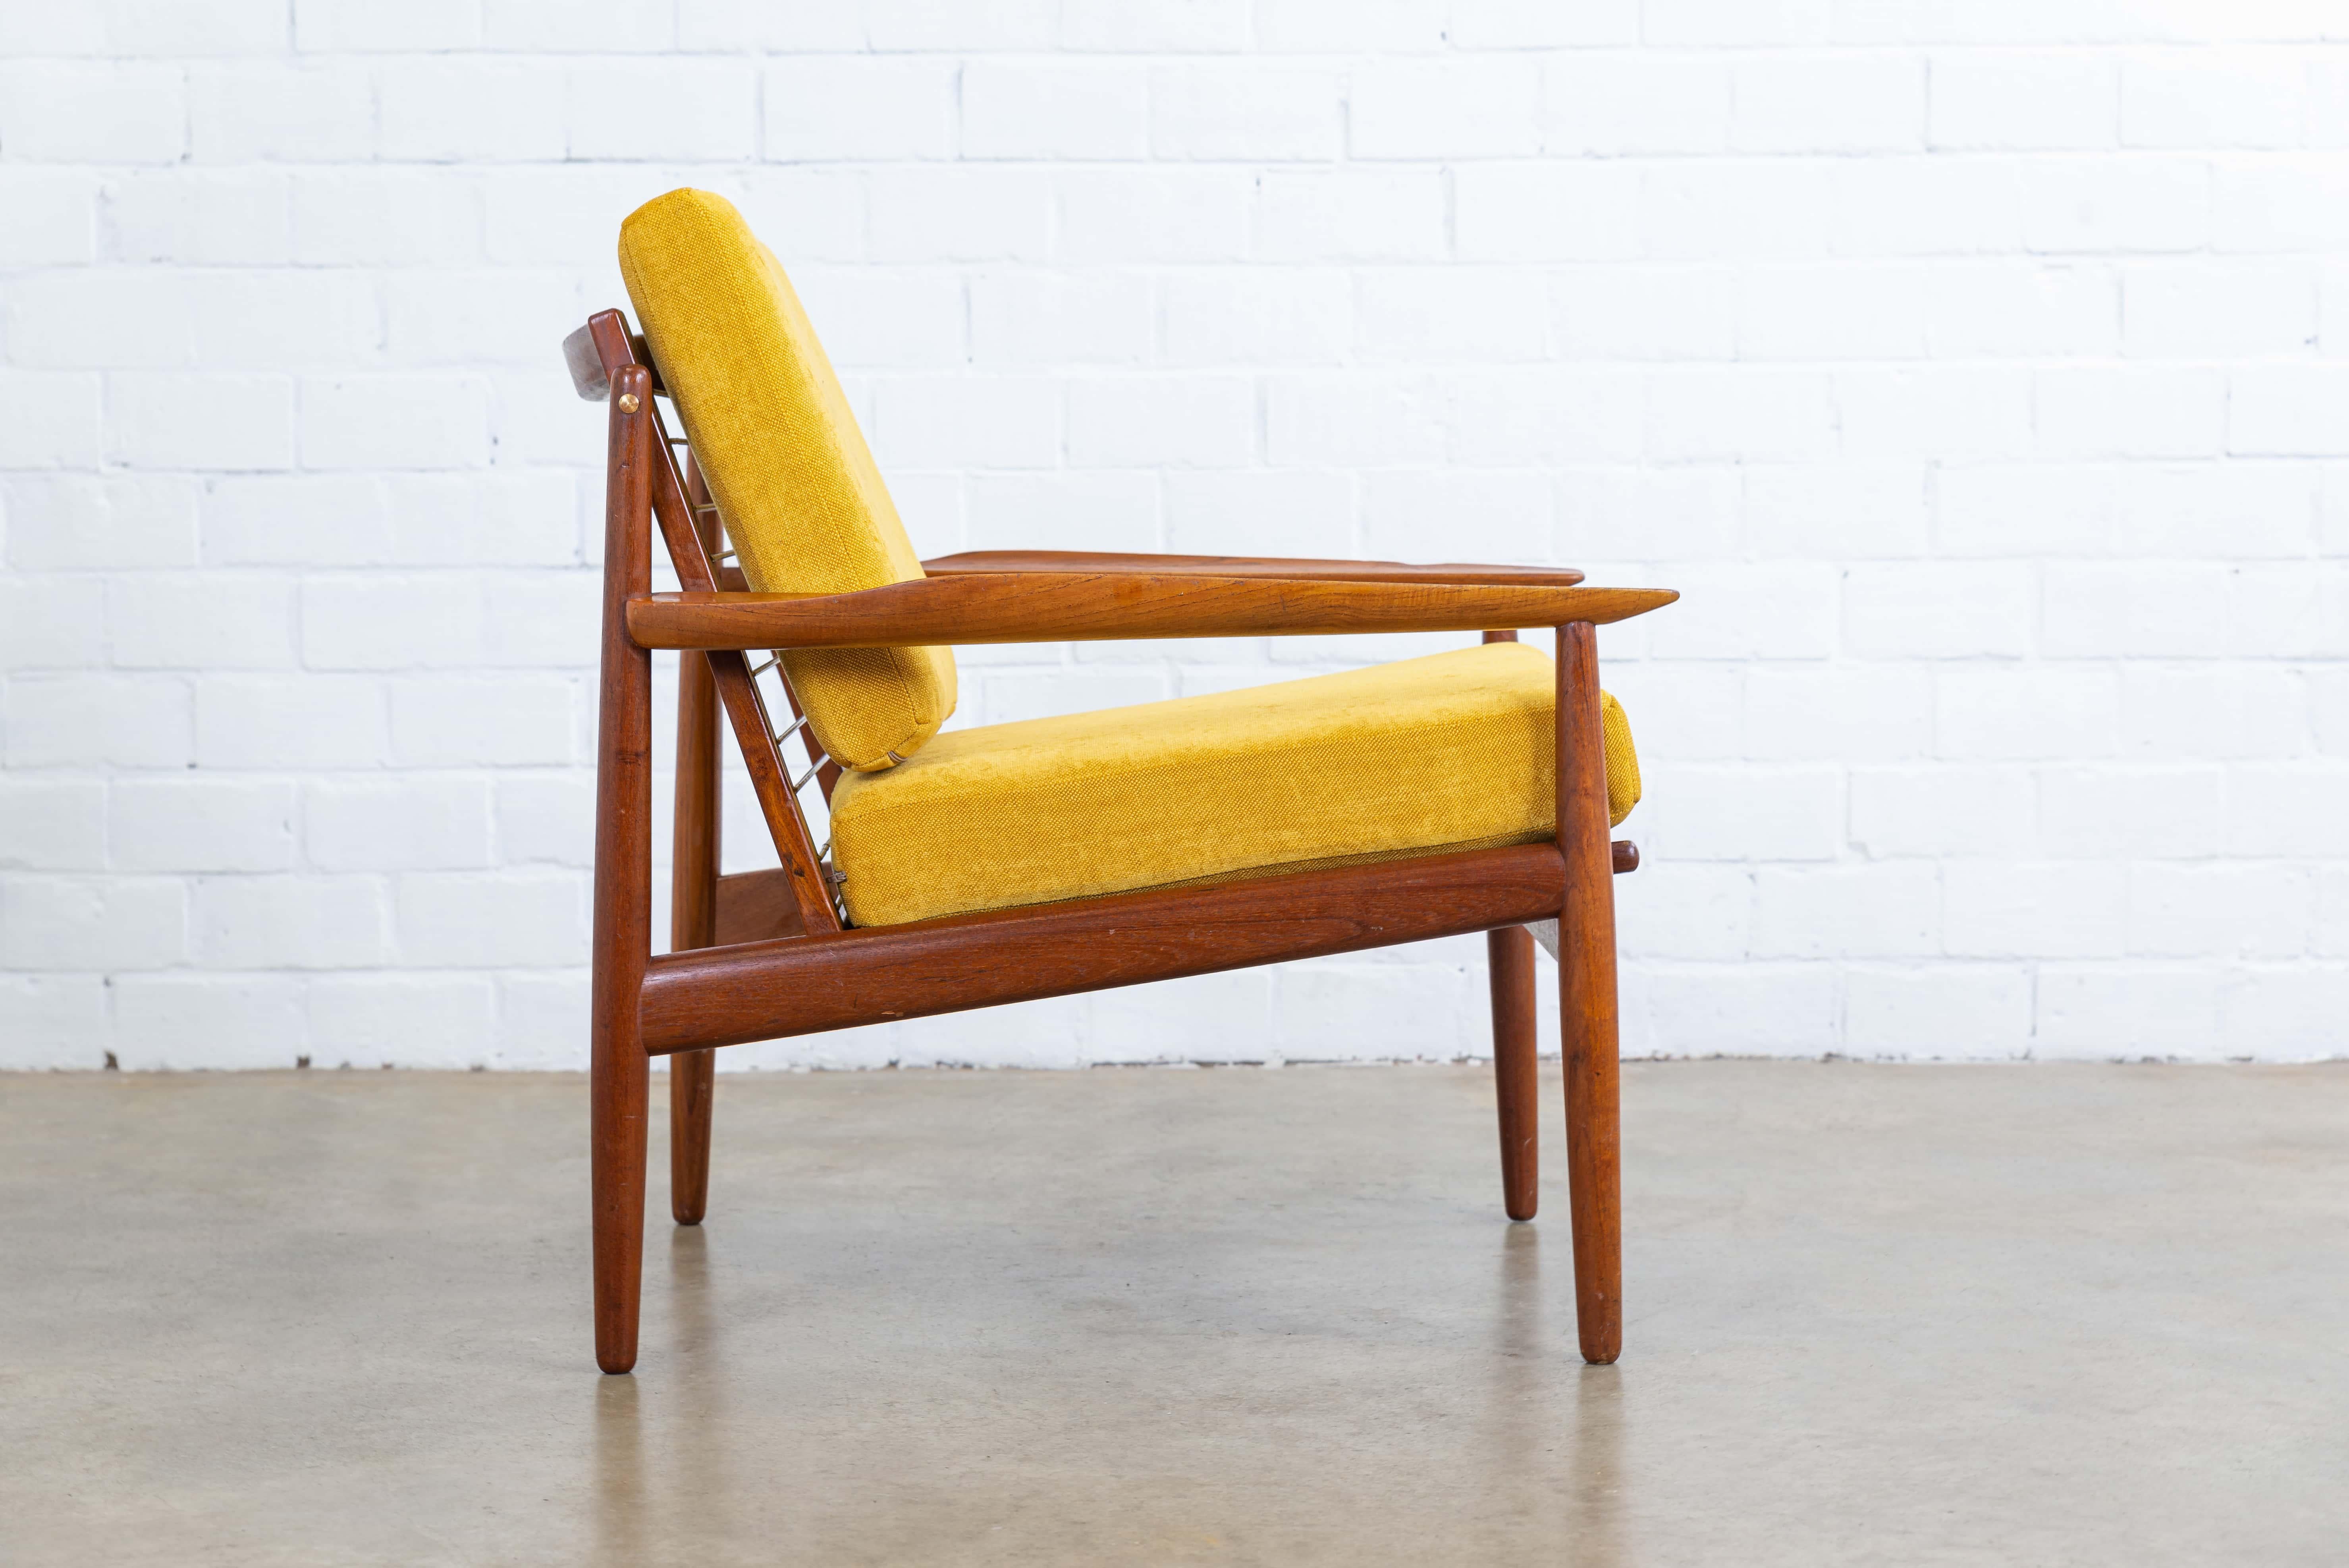 Danish lounge chair with a teak frame, new cushions and ochre-yellow upholstery.
Designed by Arne Vodder for Glostrup, Denmark, 1960s.